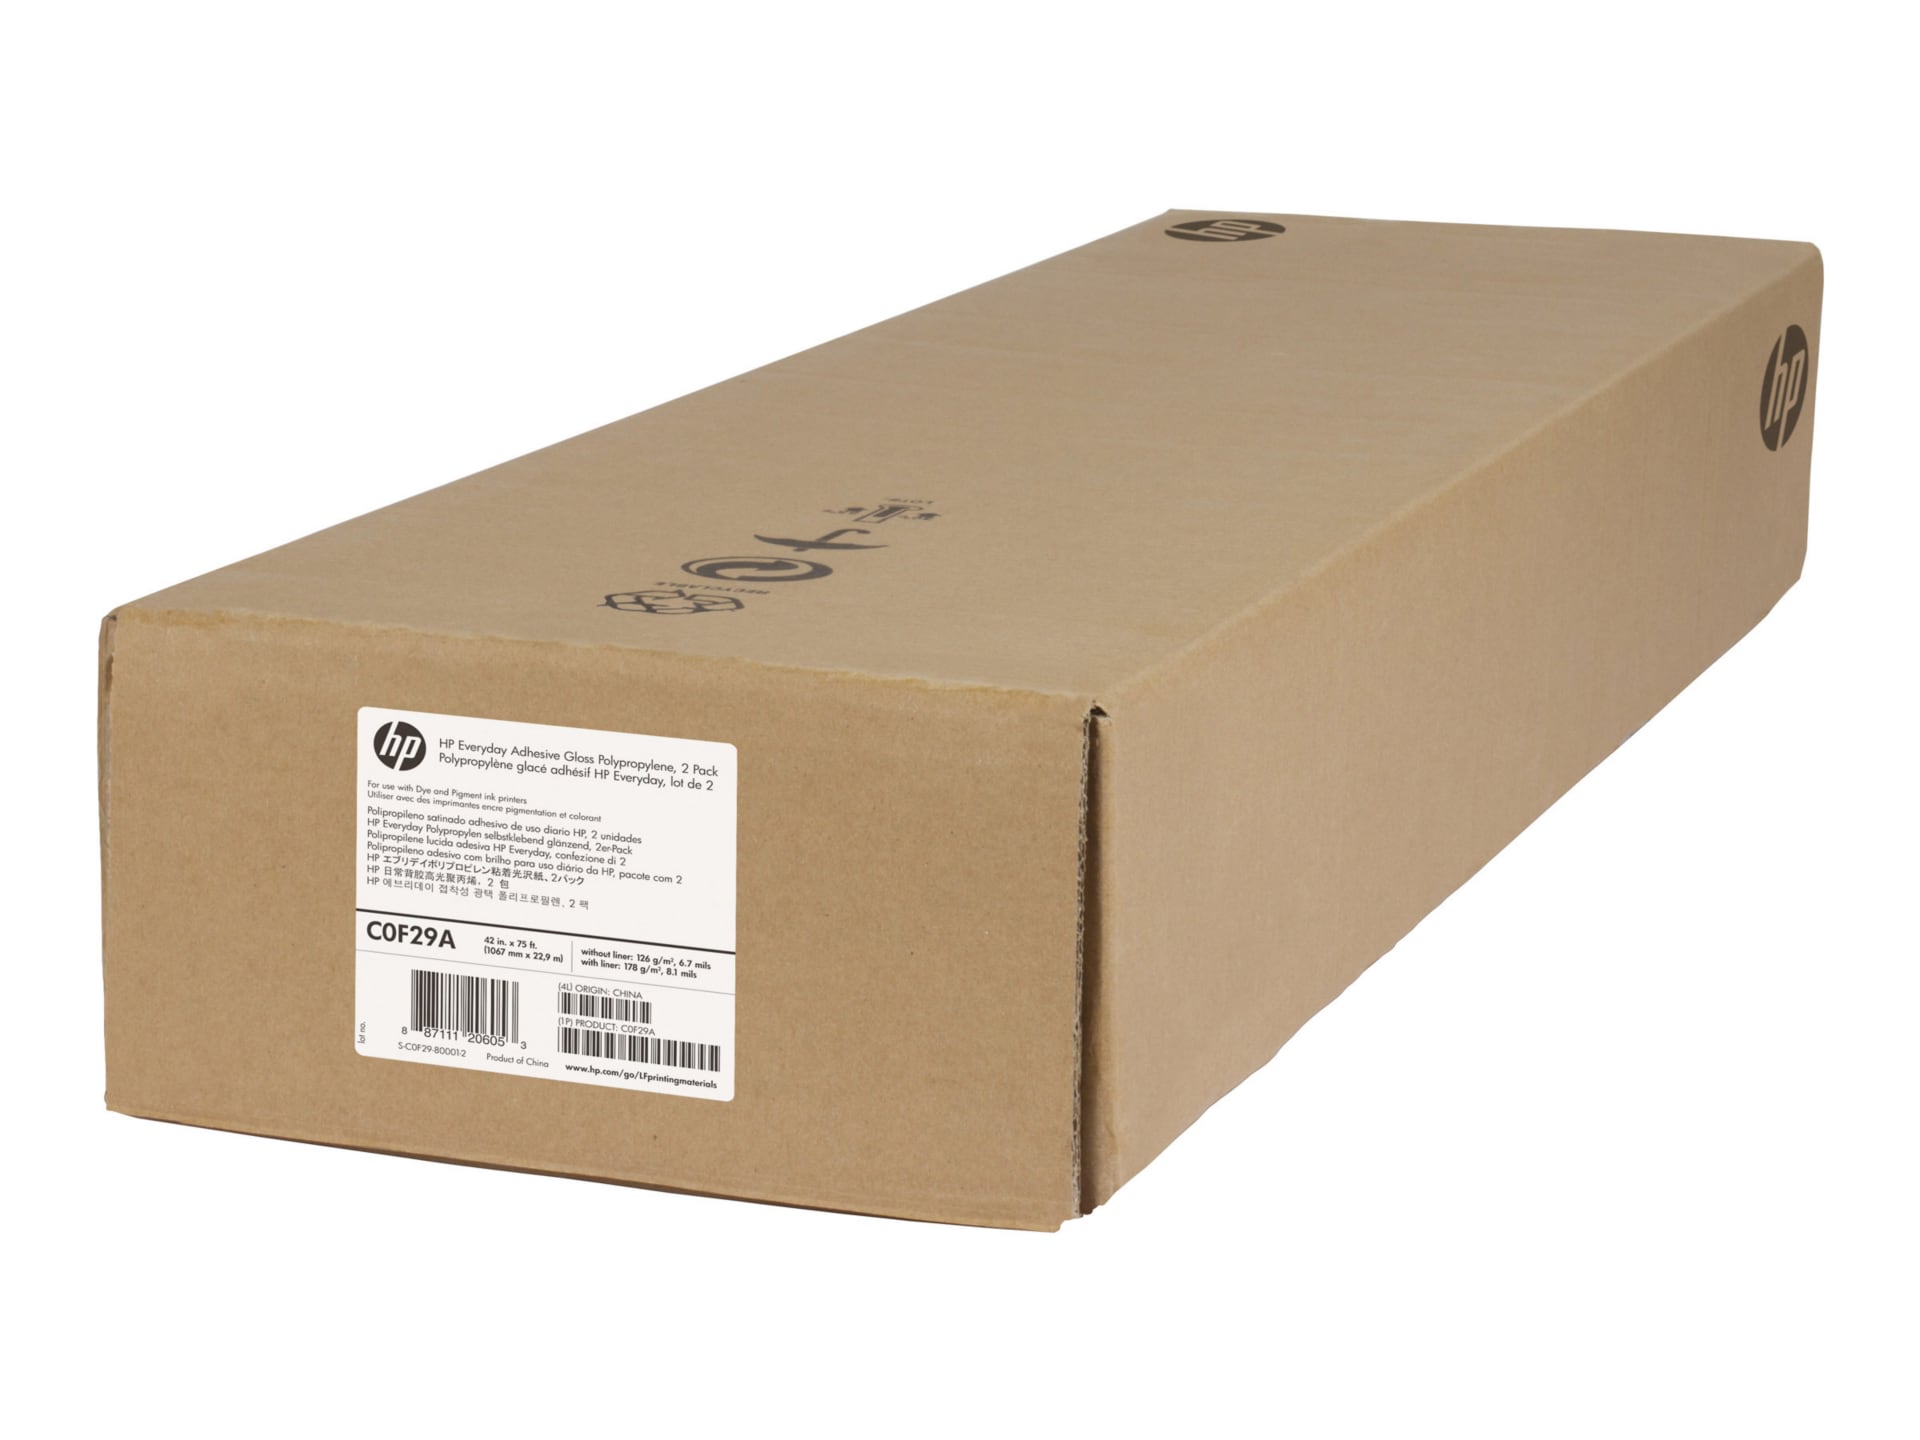 HP 2-Pack Everyday Adhesive Gloss Polypropylene-1067 mm x 22.9 m (42 in x 7